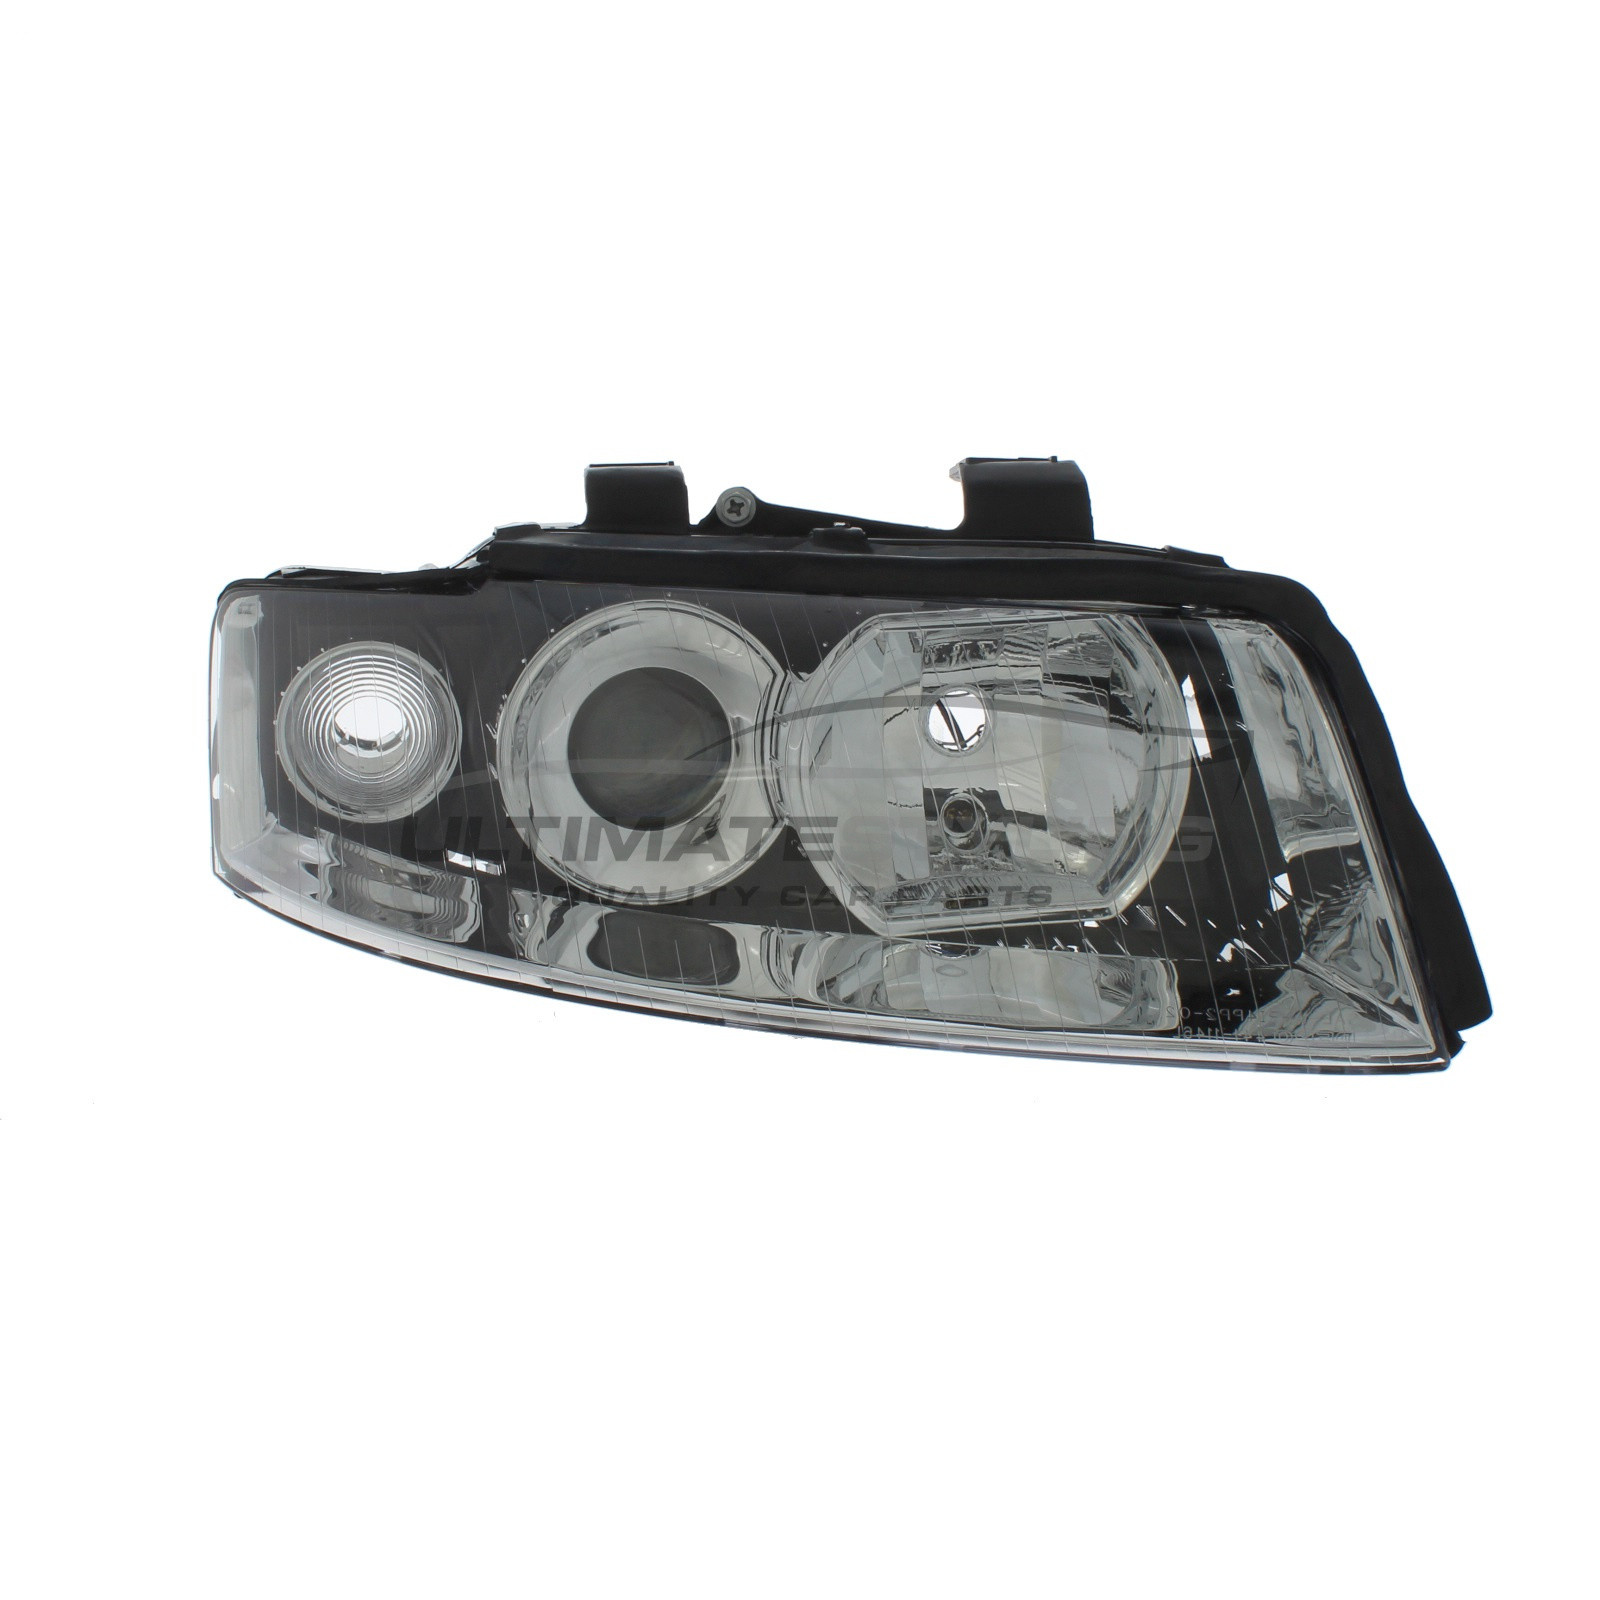 Audi A4 2001-2004 Halogen, Electric Without Motor, Headlight / Headlamp Drivers Side (RH)